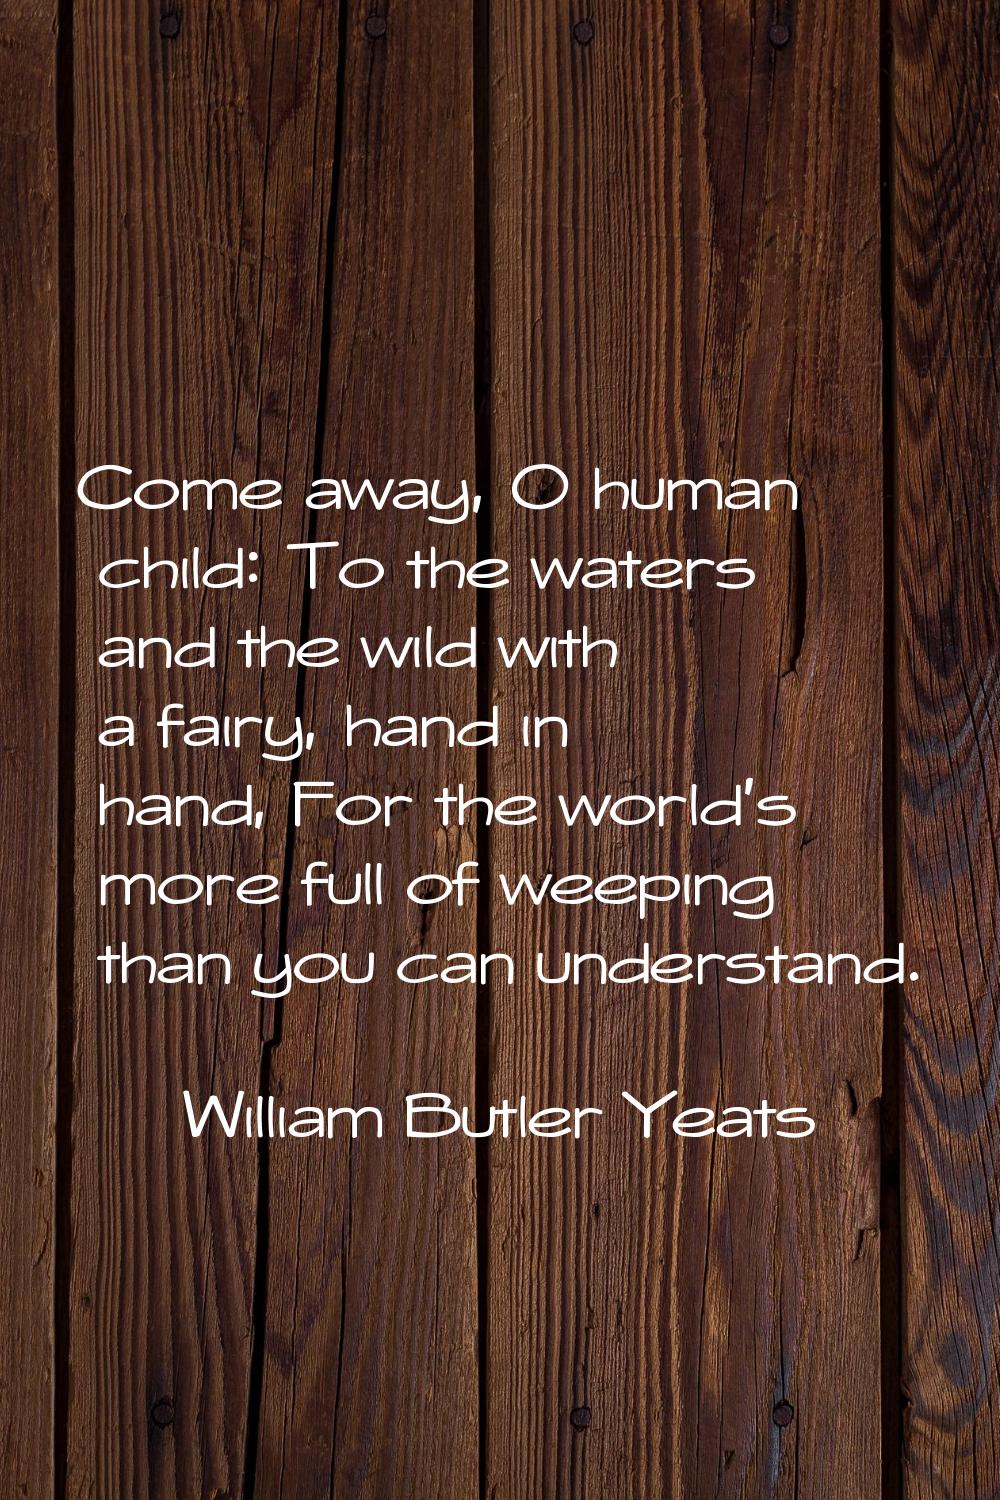 Come away, O human child: To the waters and the wild with a fairy, hand in hand, For the world's mo